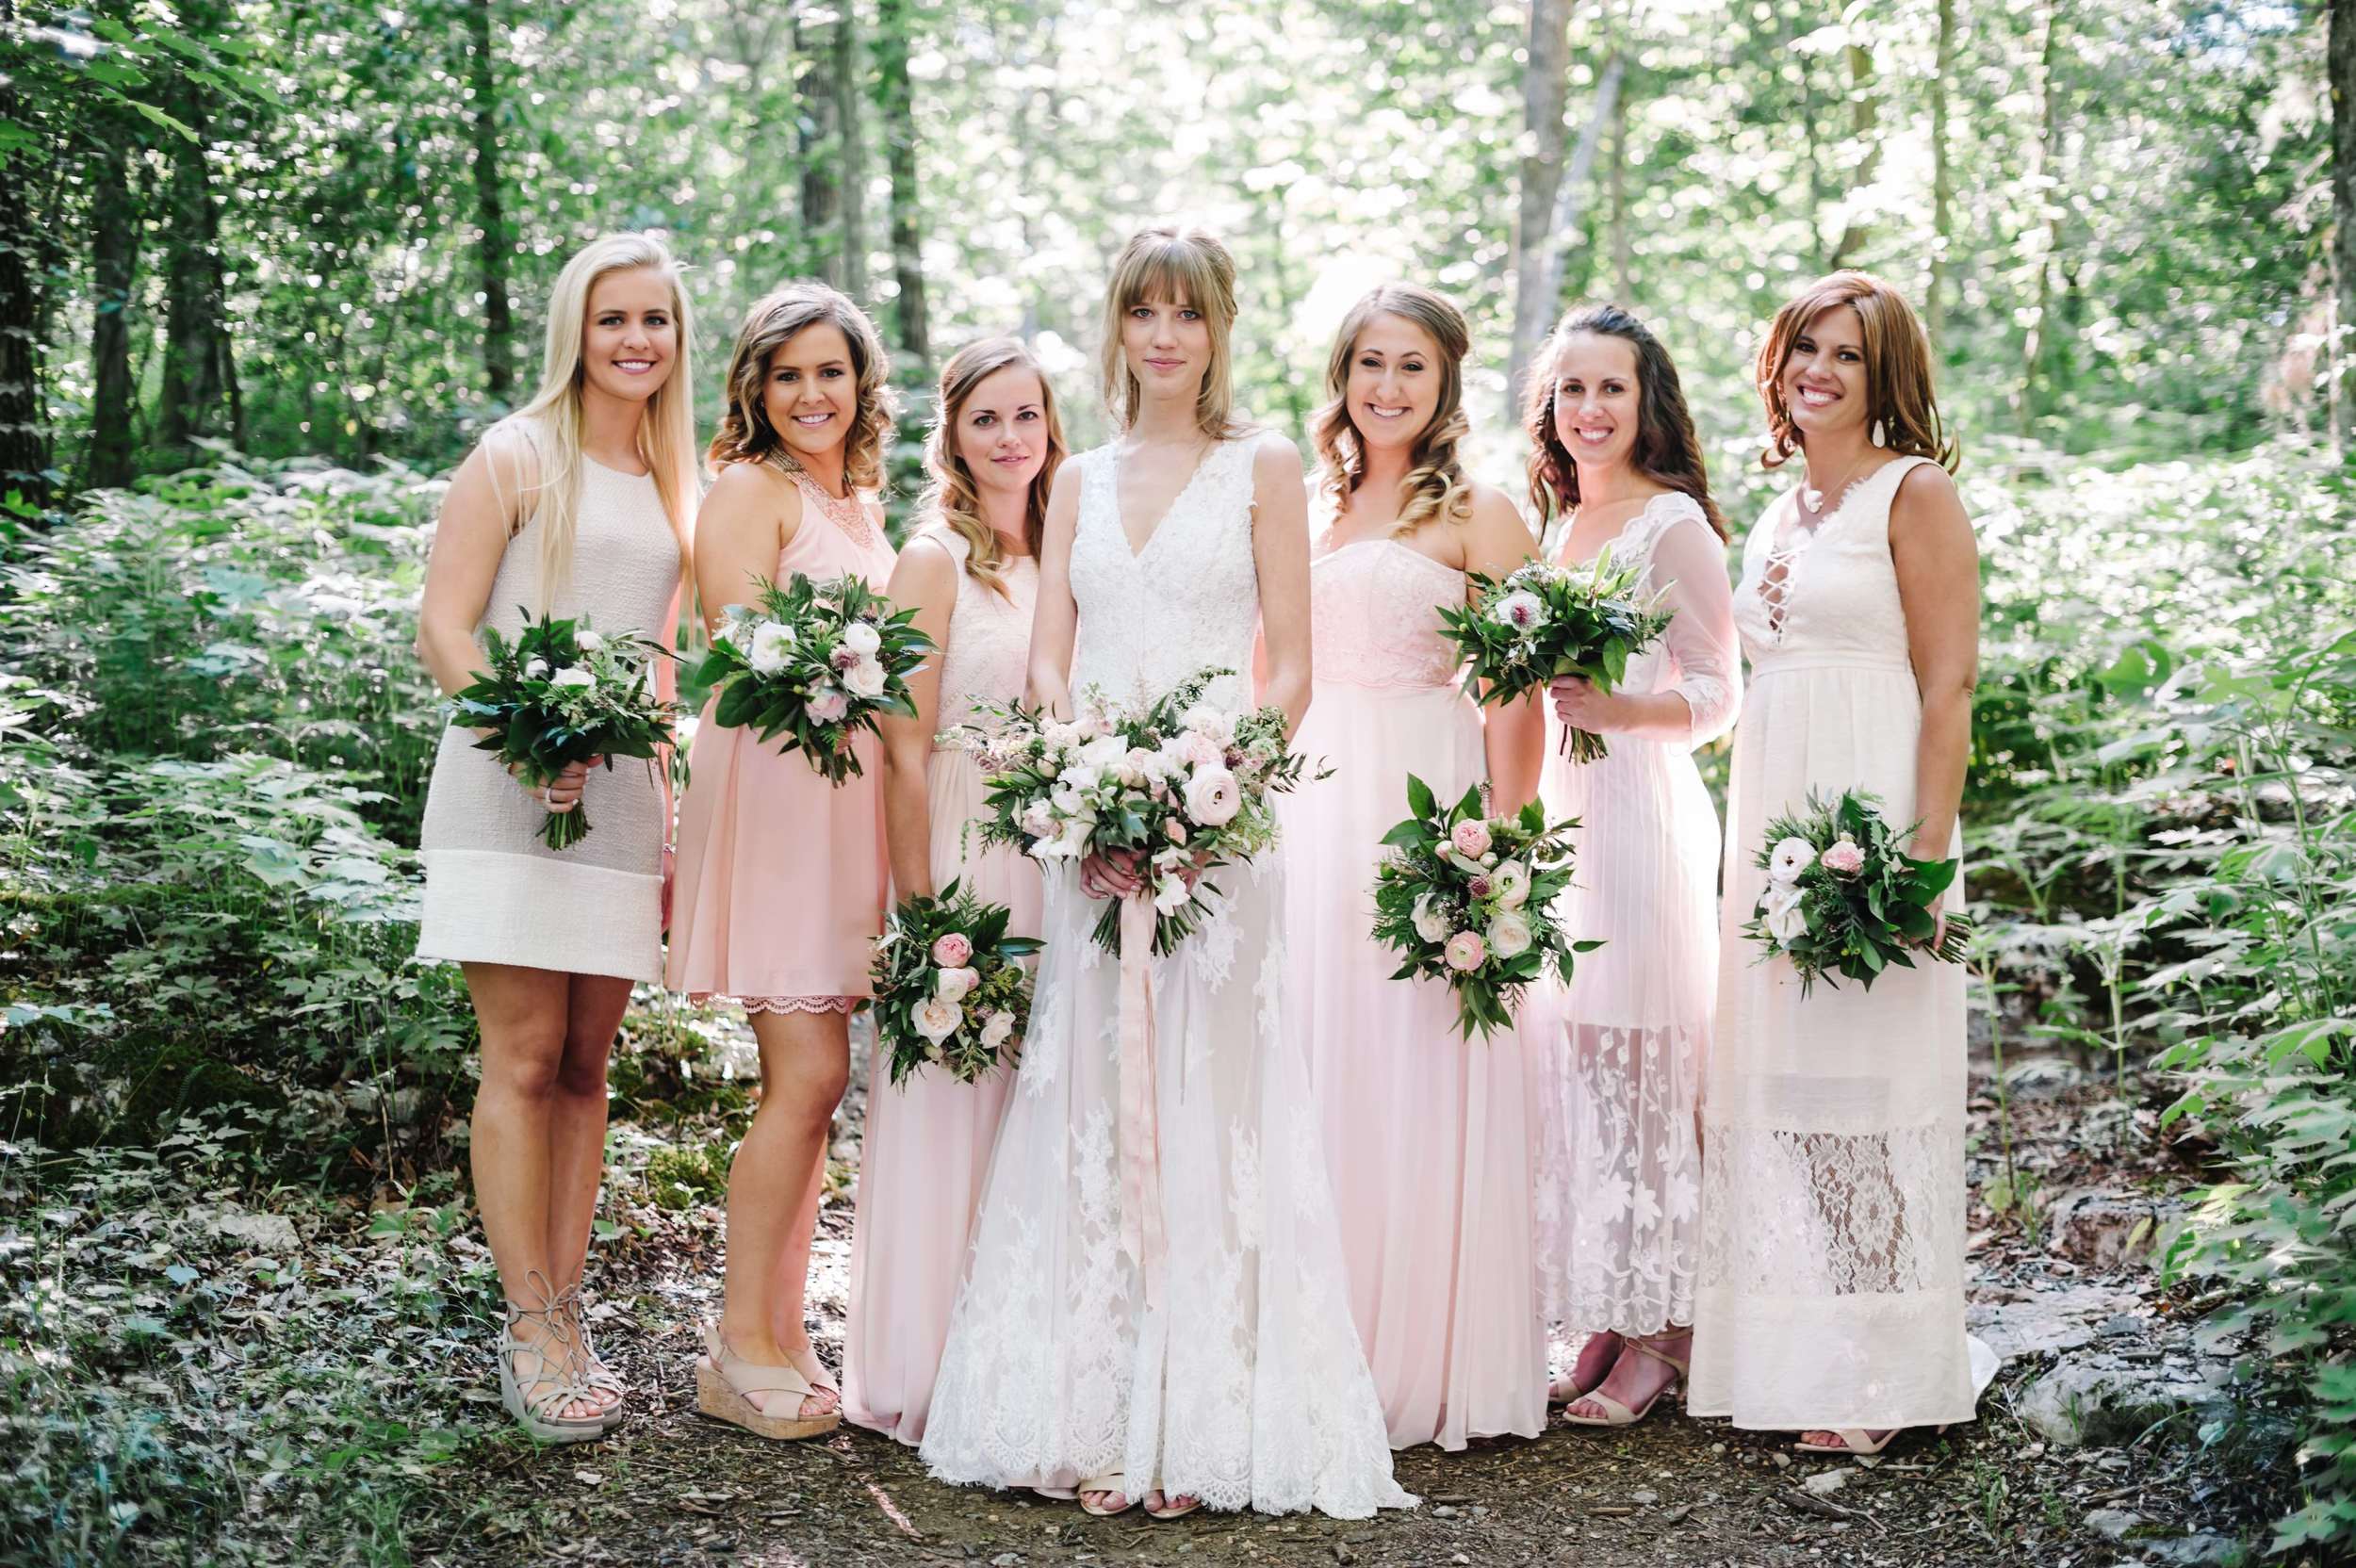 Blush and neutral bridesmaid style // Bridal party portraits in the woods